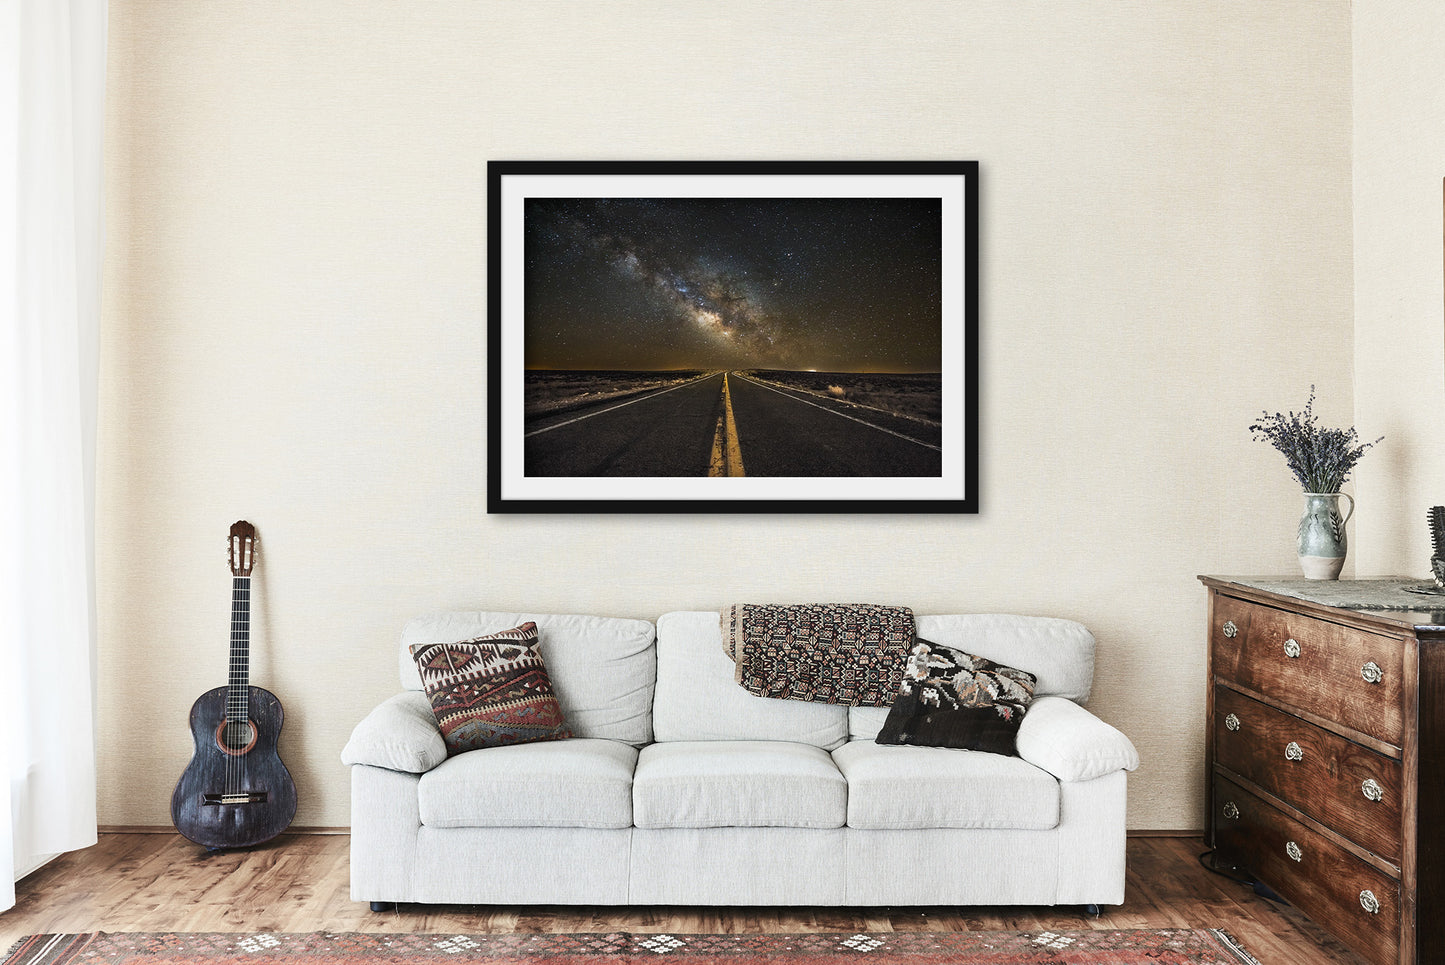 Framed Celestial Print - Ready to Hang Picture of Milky Way Rising Above Highway on Starry Night in Arizona - Road Trip Wall Art Photo Decor